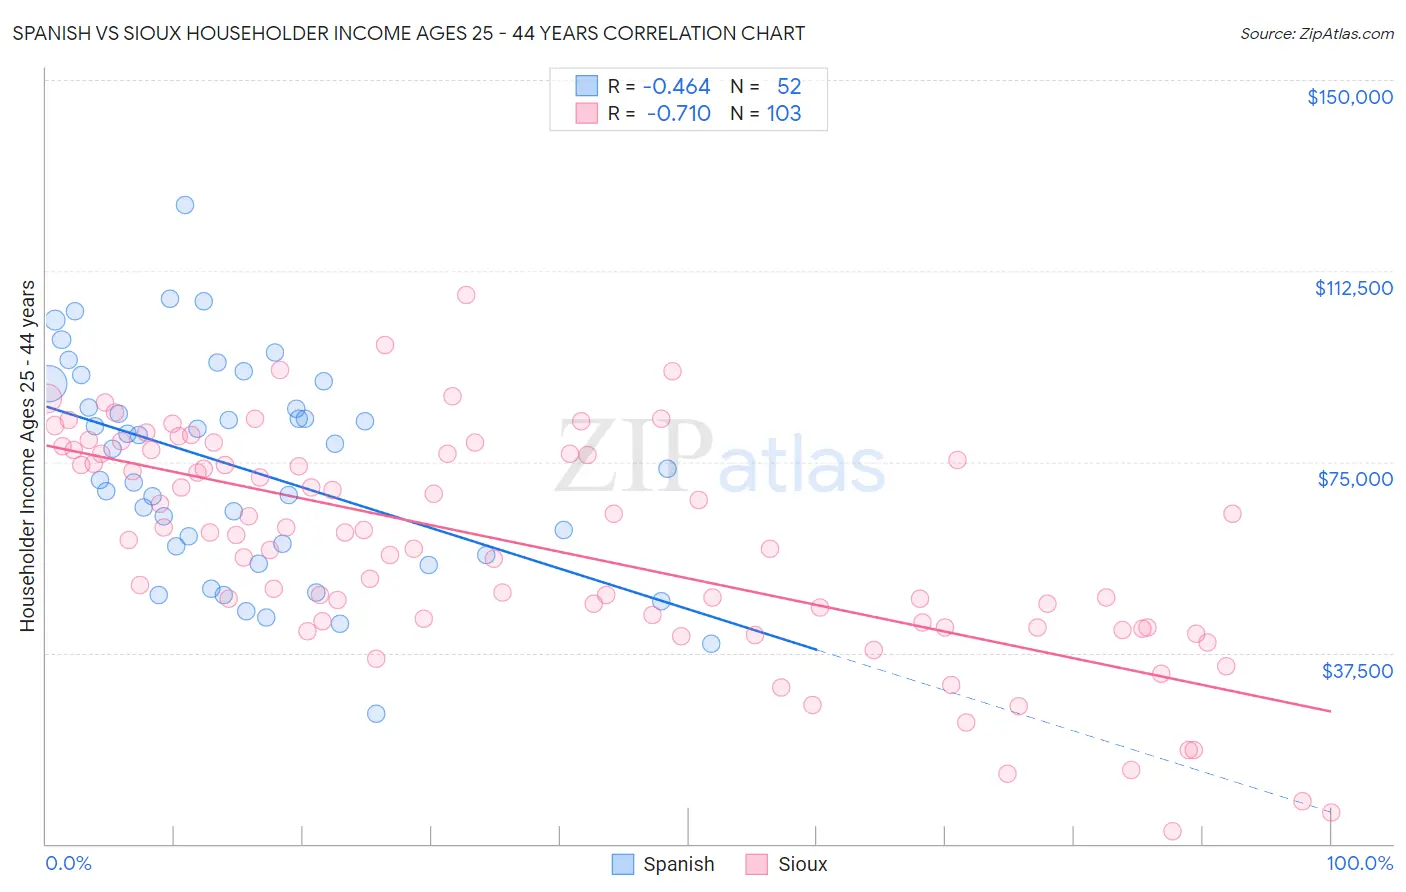 Spanish vs Sioux Householder Income Ages 25 - 44 years